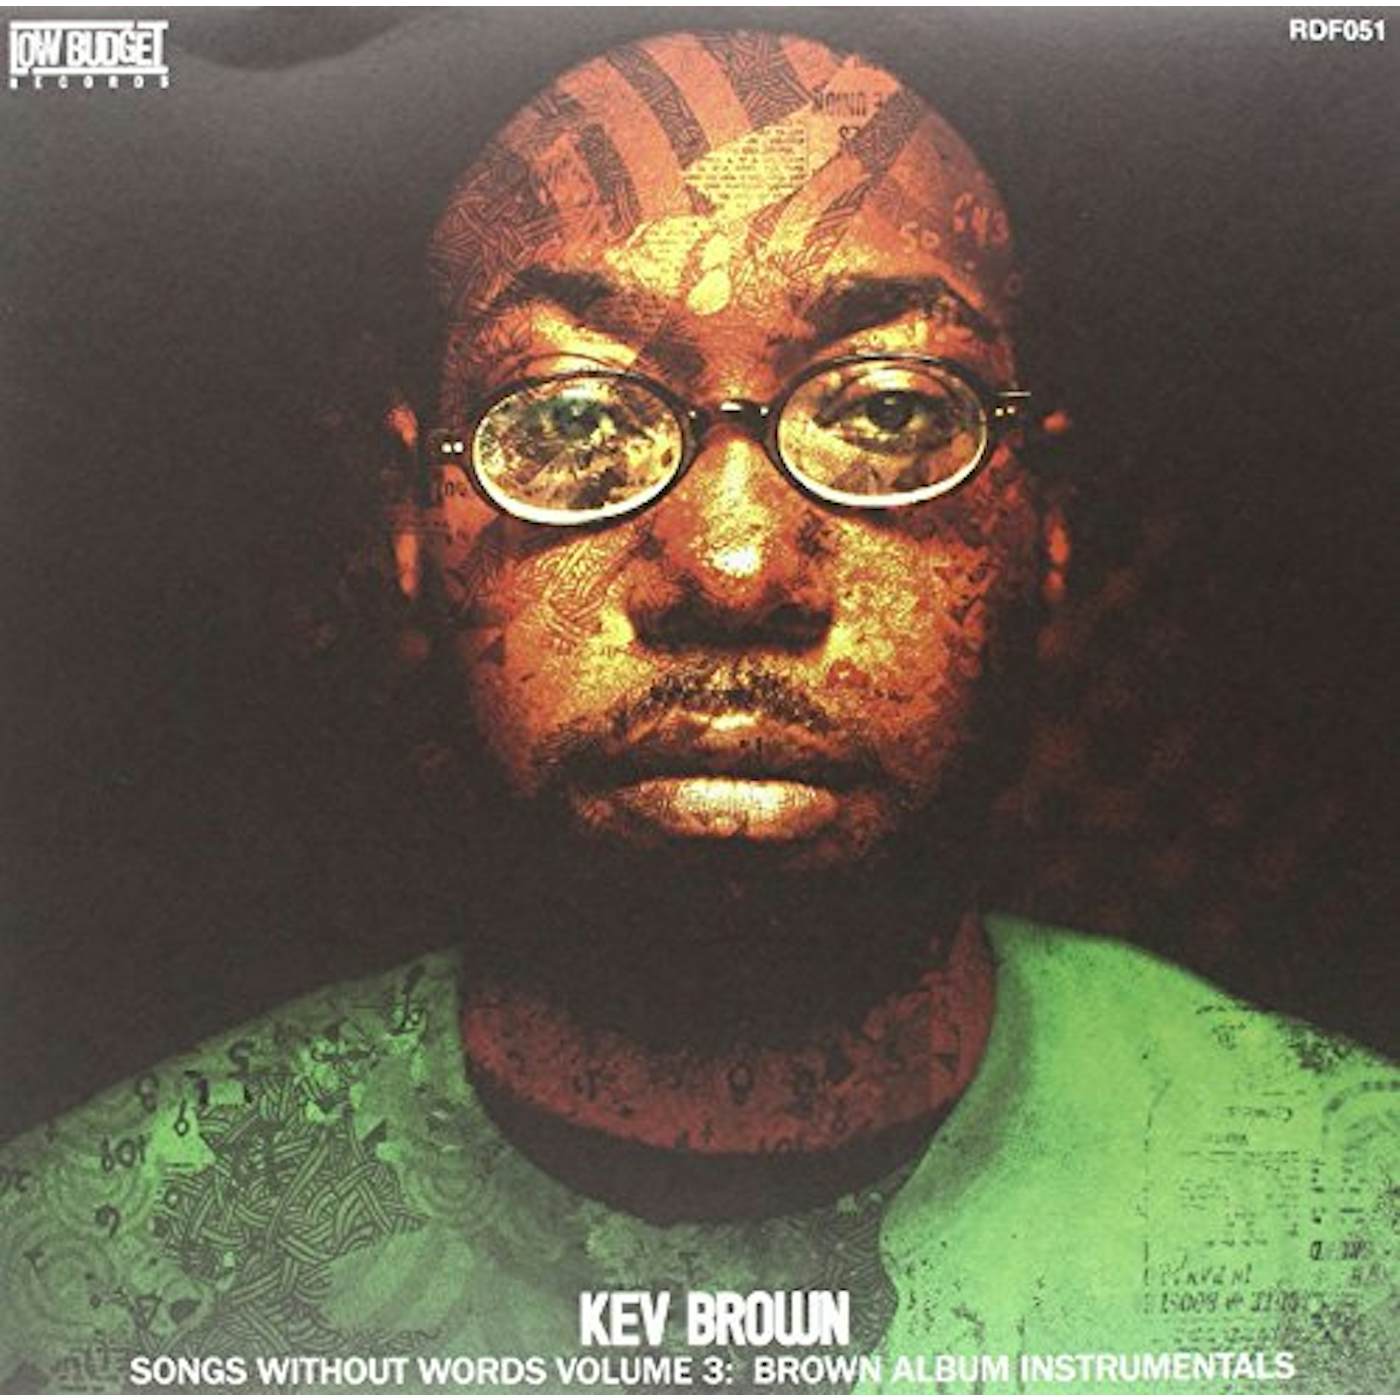 Kev Brown SONGS WITHOUT WORDS 3: BROWN ALBUM INSTRUMENTALS Vinyl Record